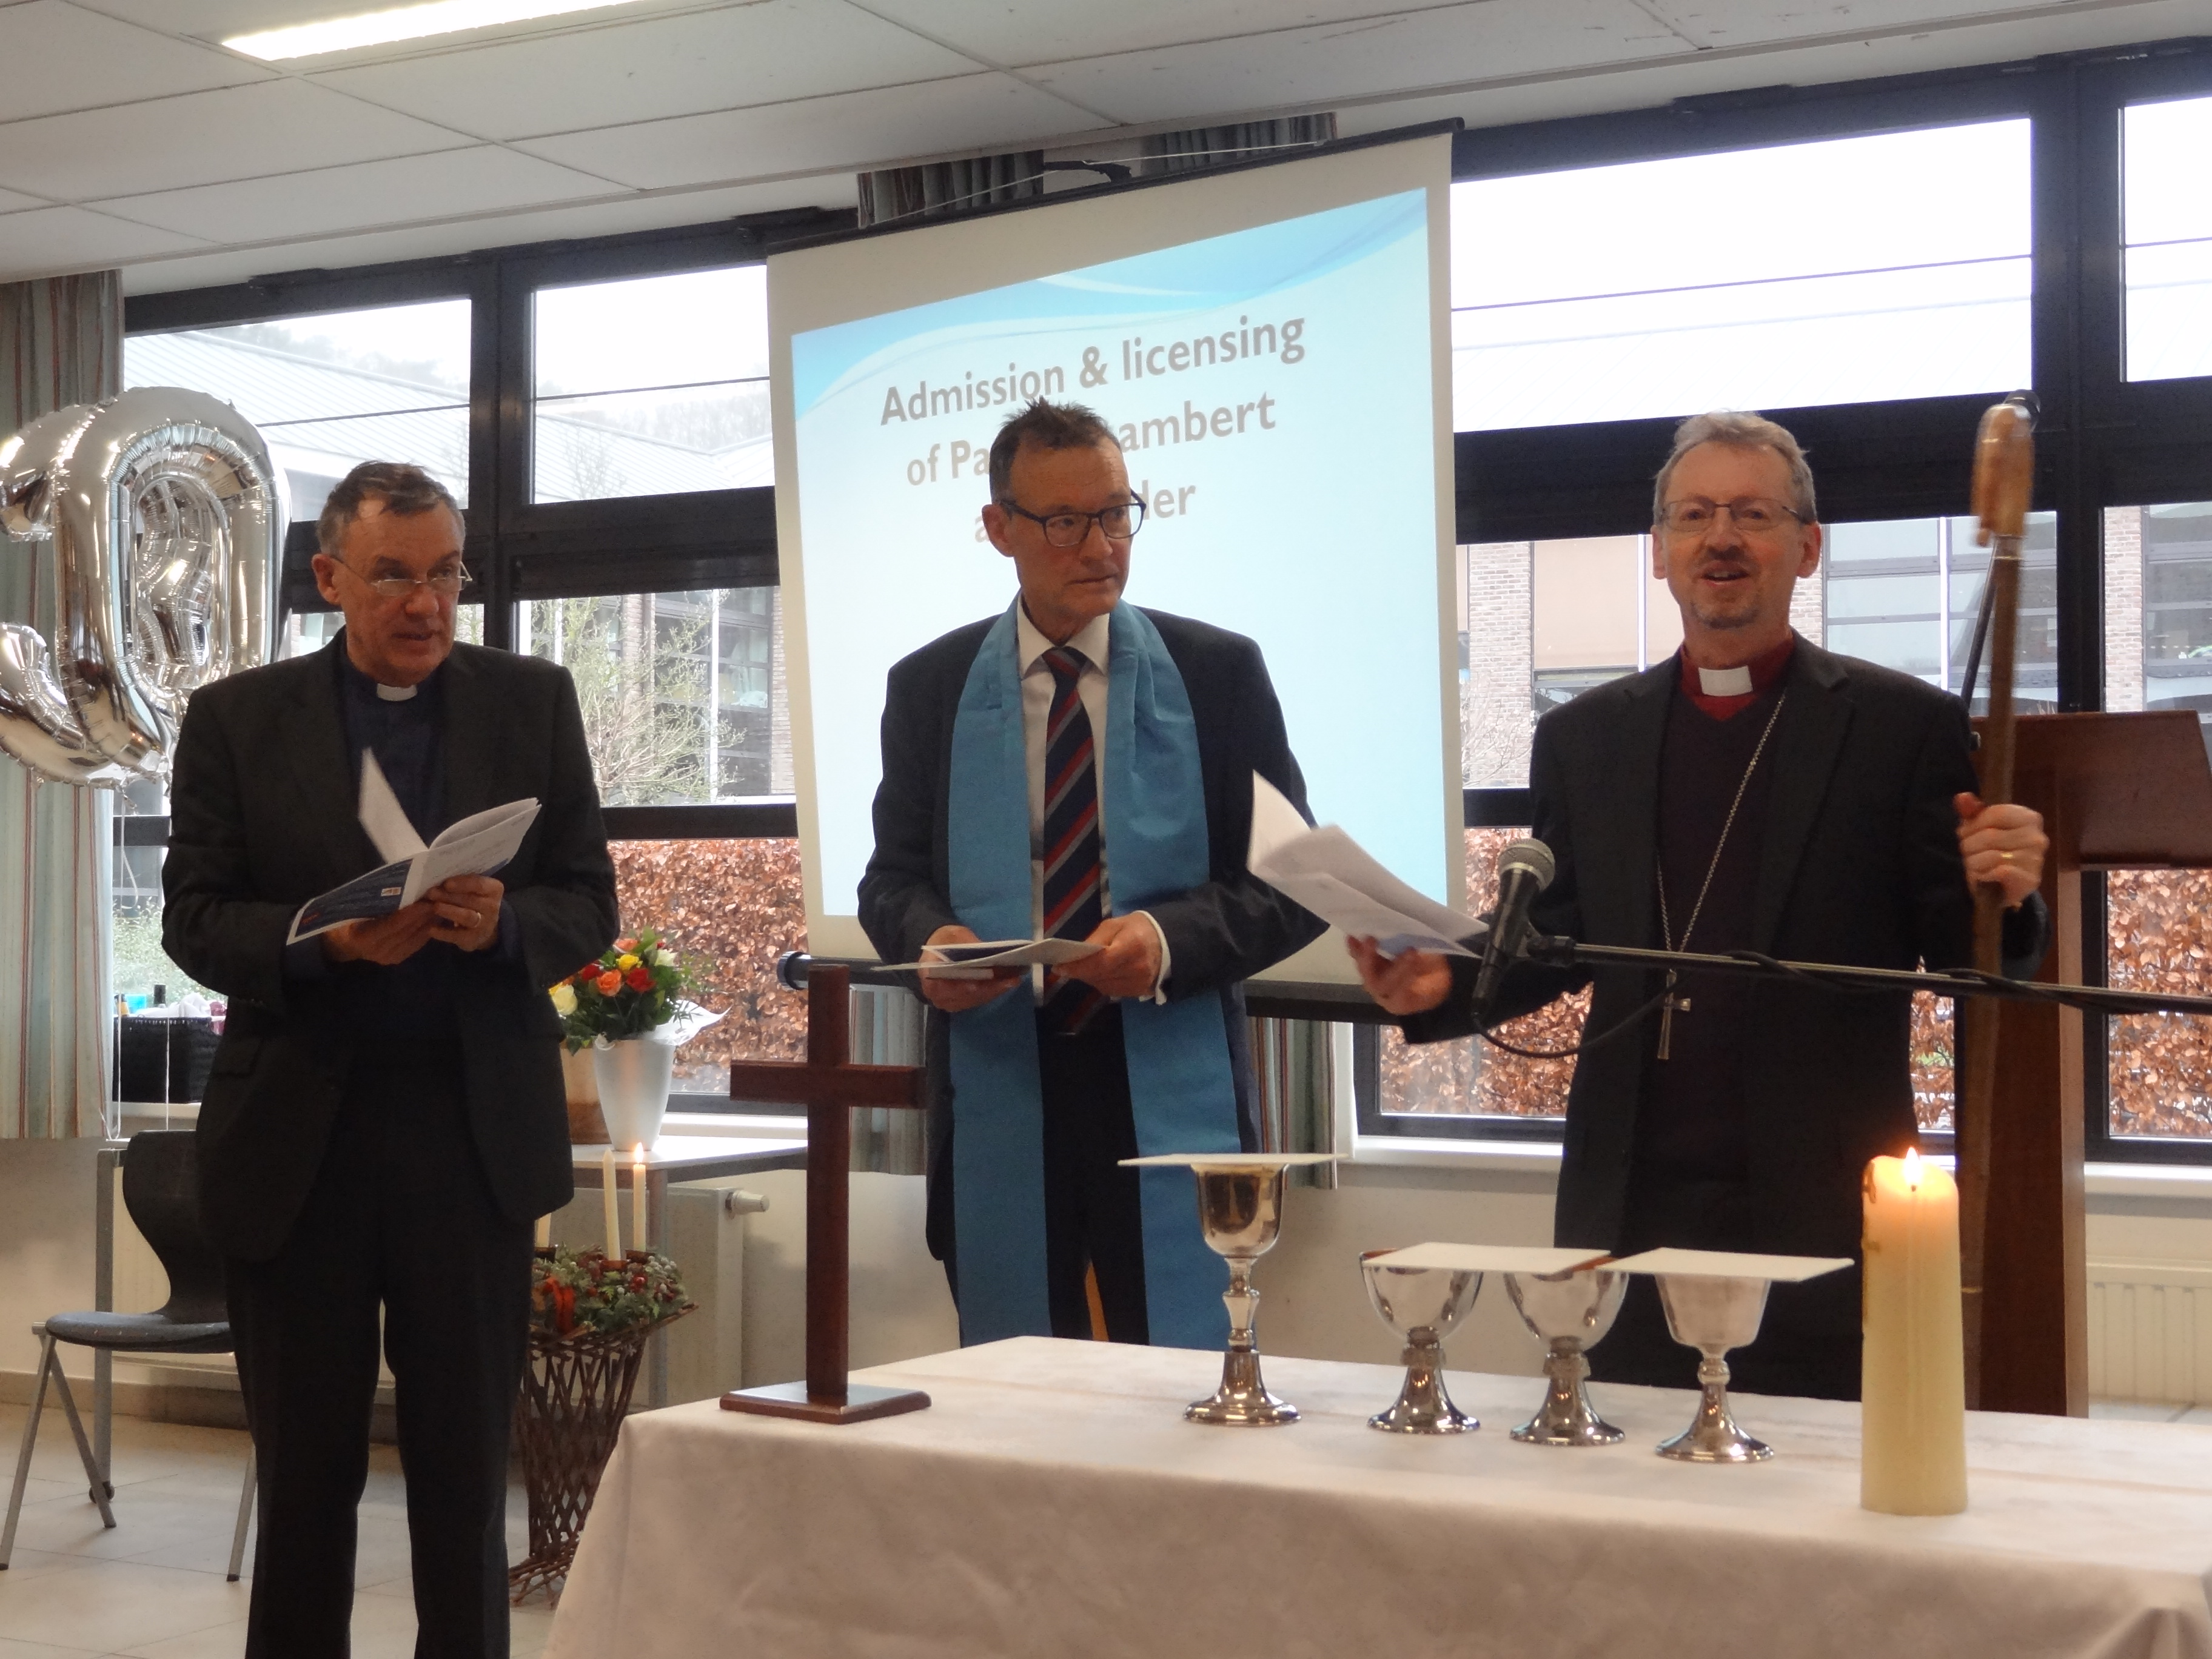 Over the coming months, we will feature some experiences of Reader Ministry across the Diocese.  We start with a personal Testimony contributed by Patrick Lambert, a licensed Reader at St Paul's,Tervuren.